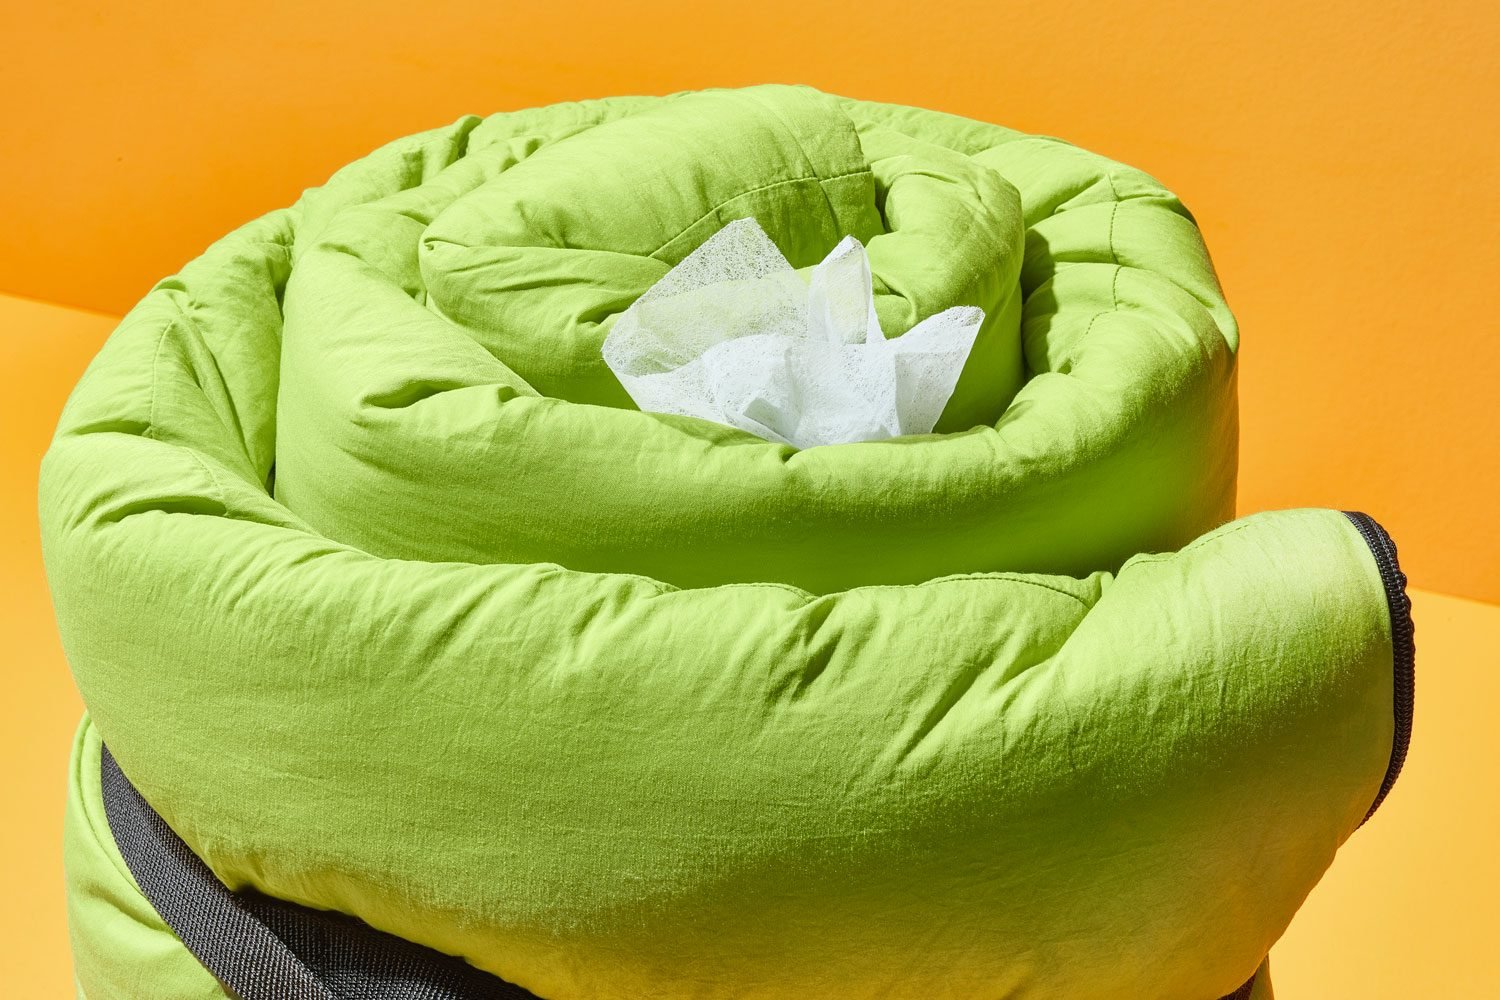 dryer sheet poking out of a rolled up green sleeping bag; orange background